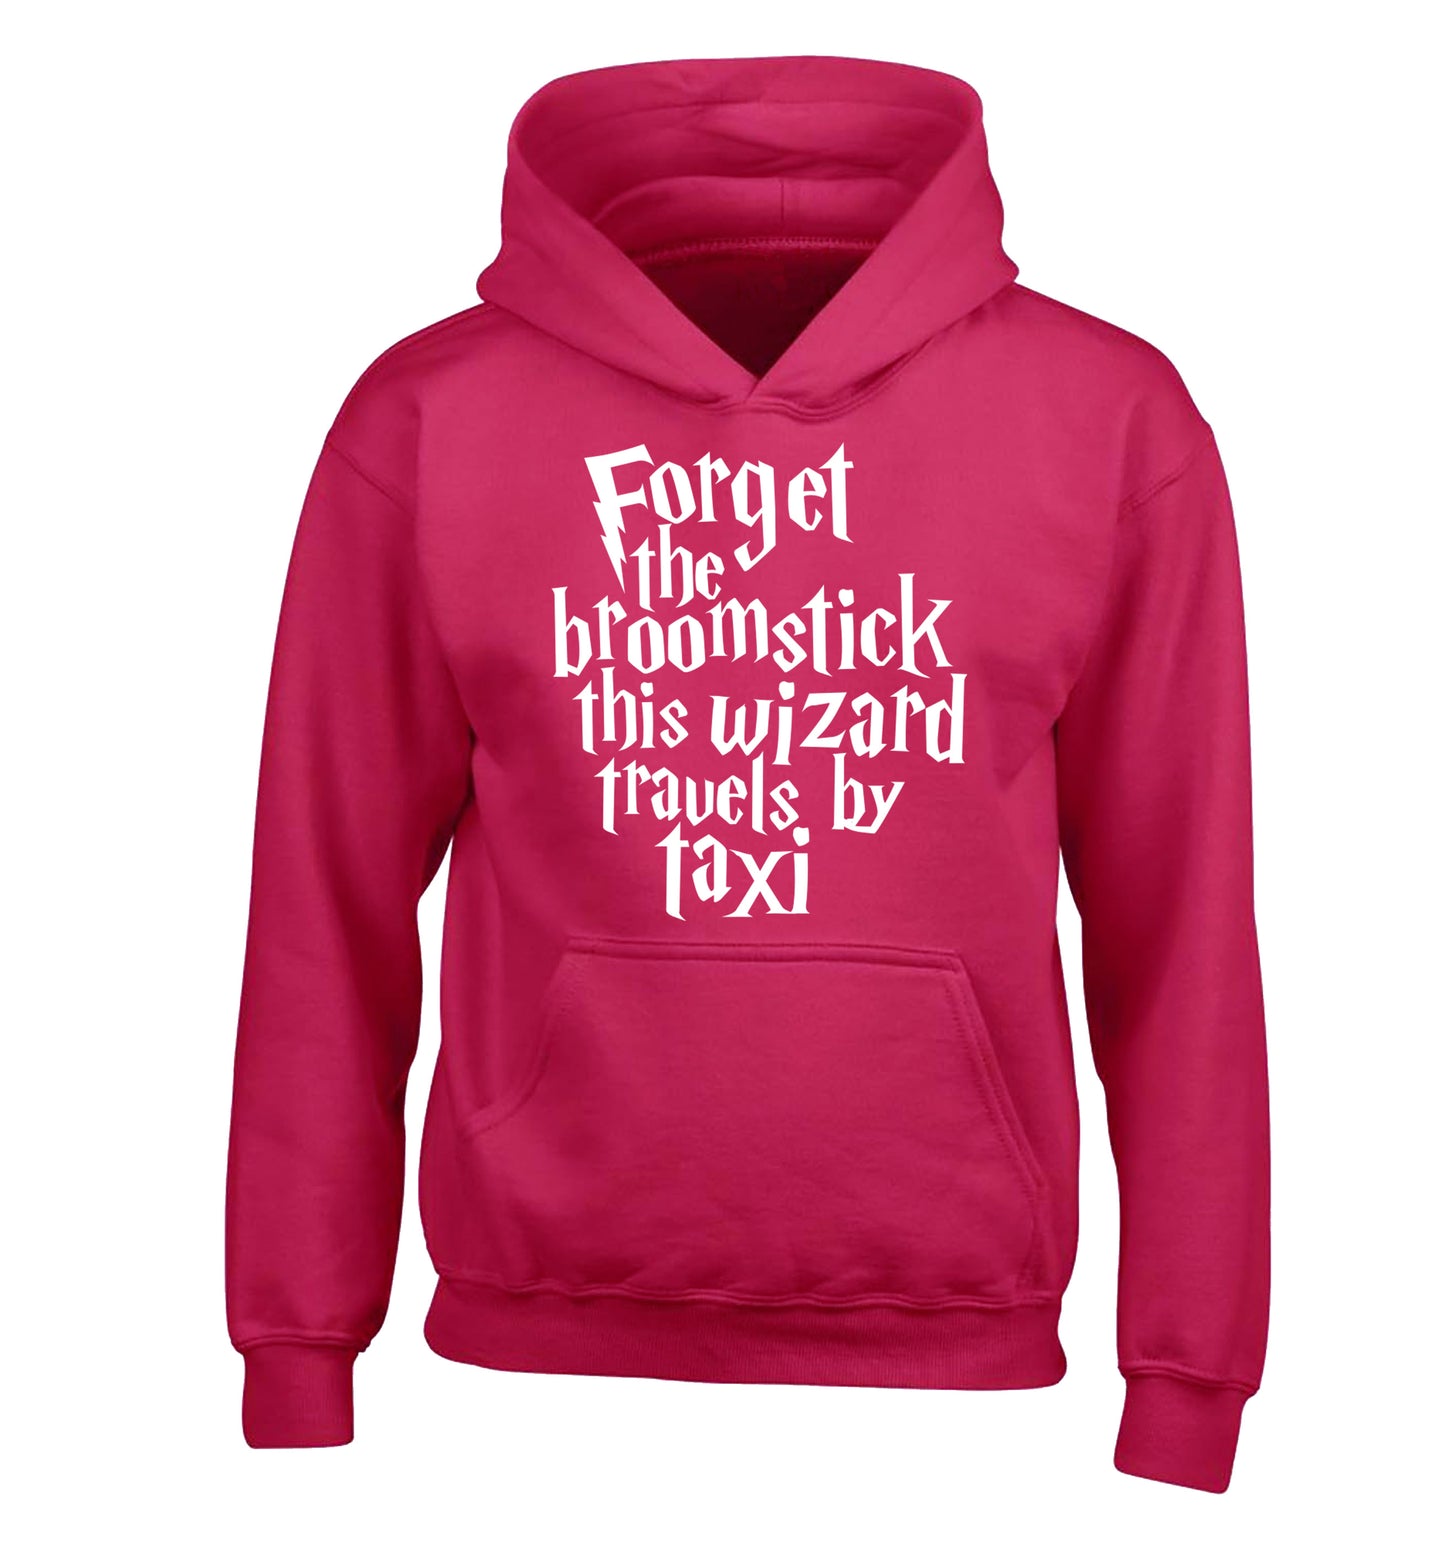 Forget the broomstick this wizard travels by taxi children's pink hoodie 12-14 Years